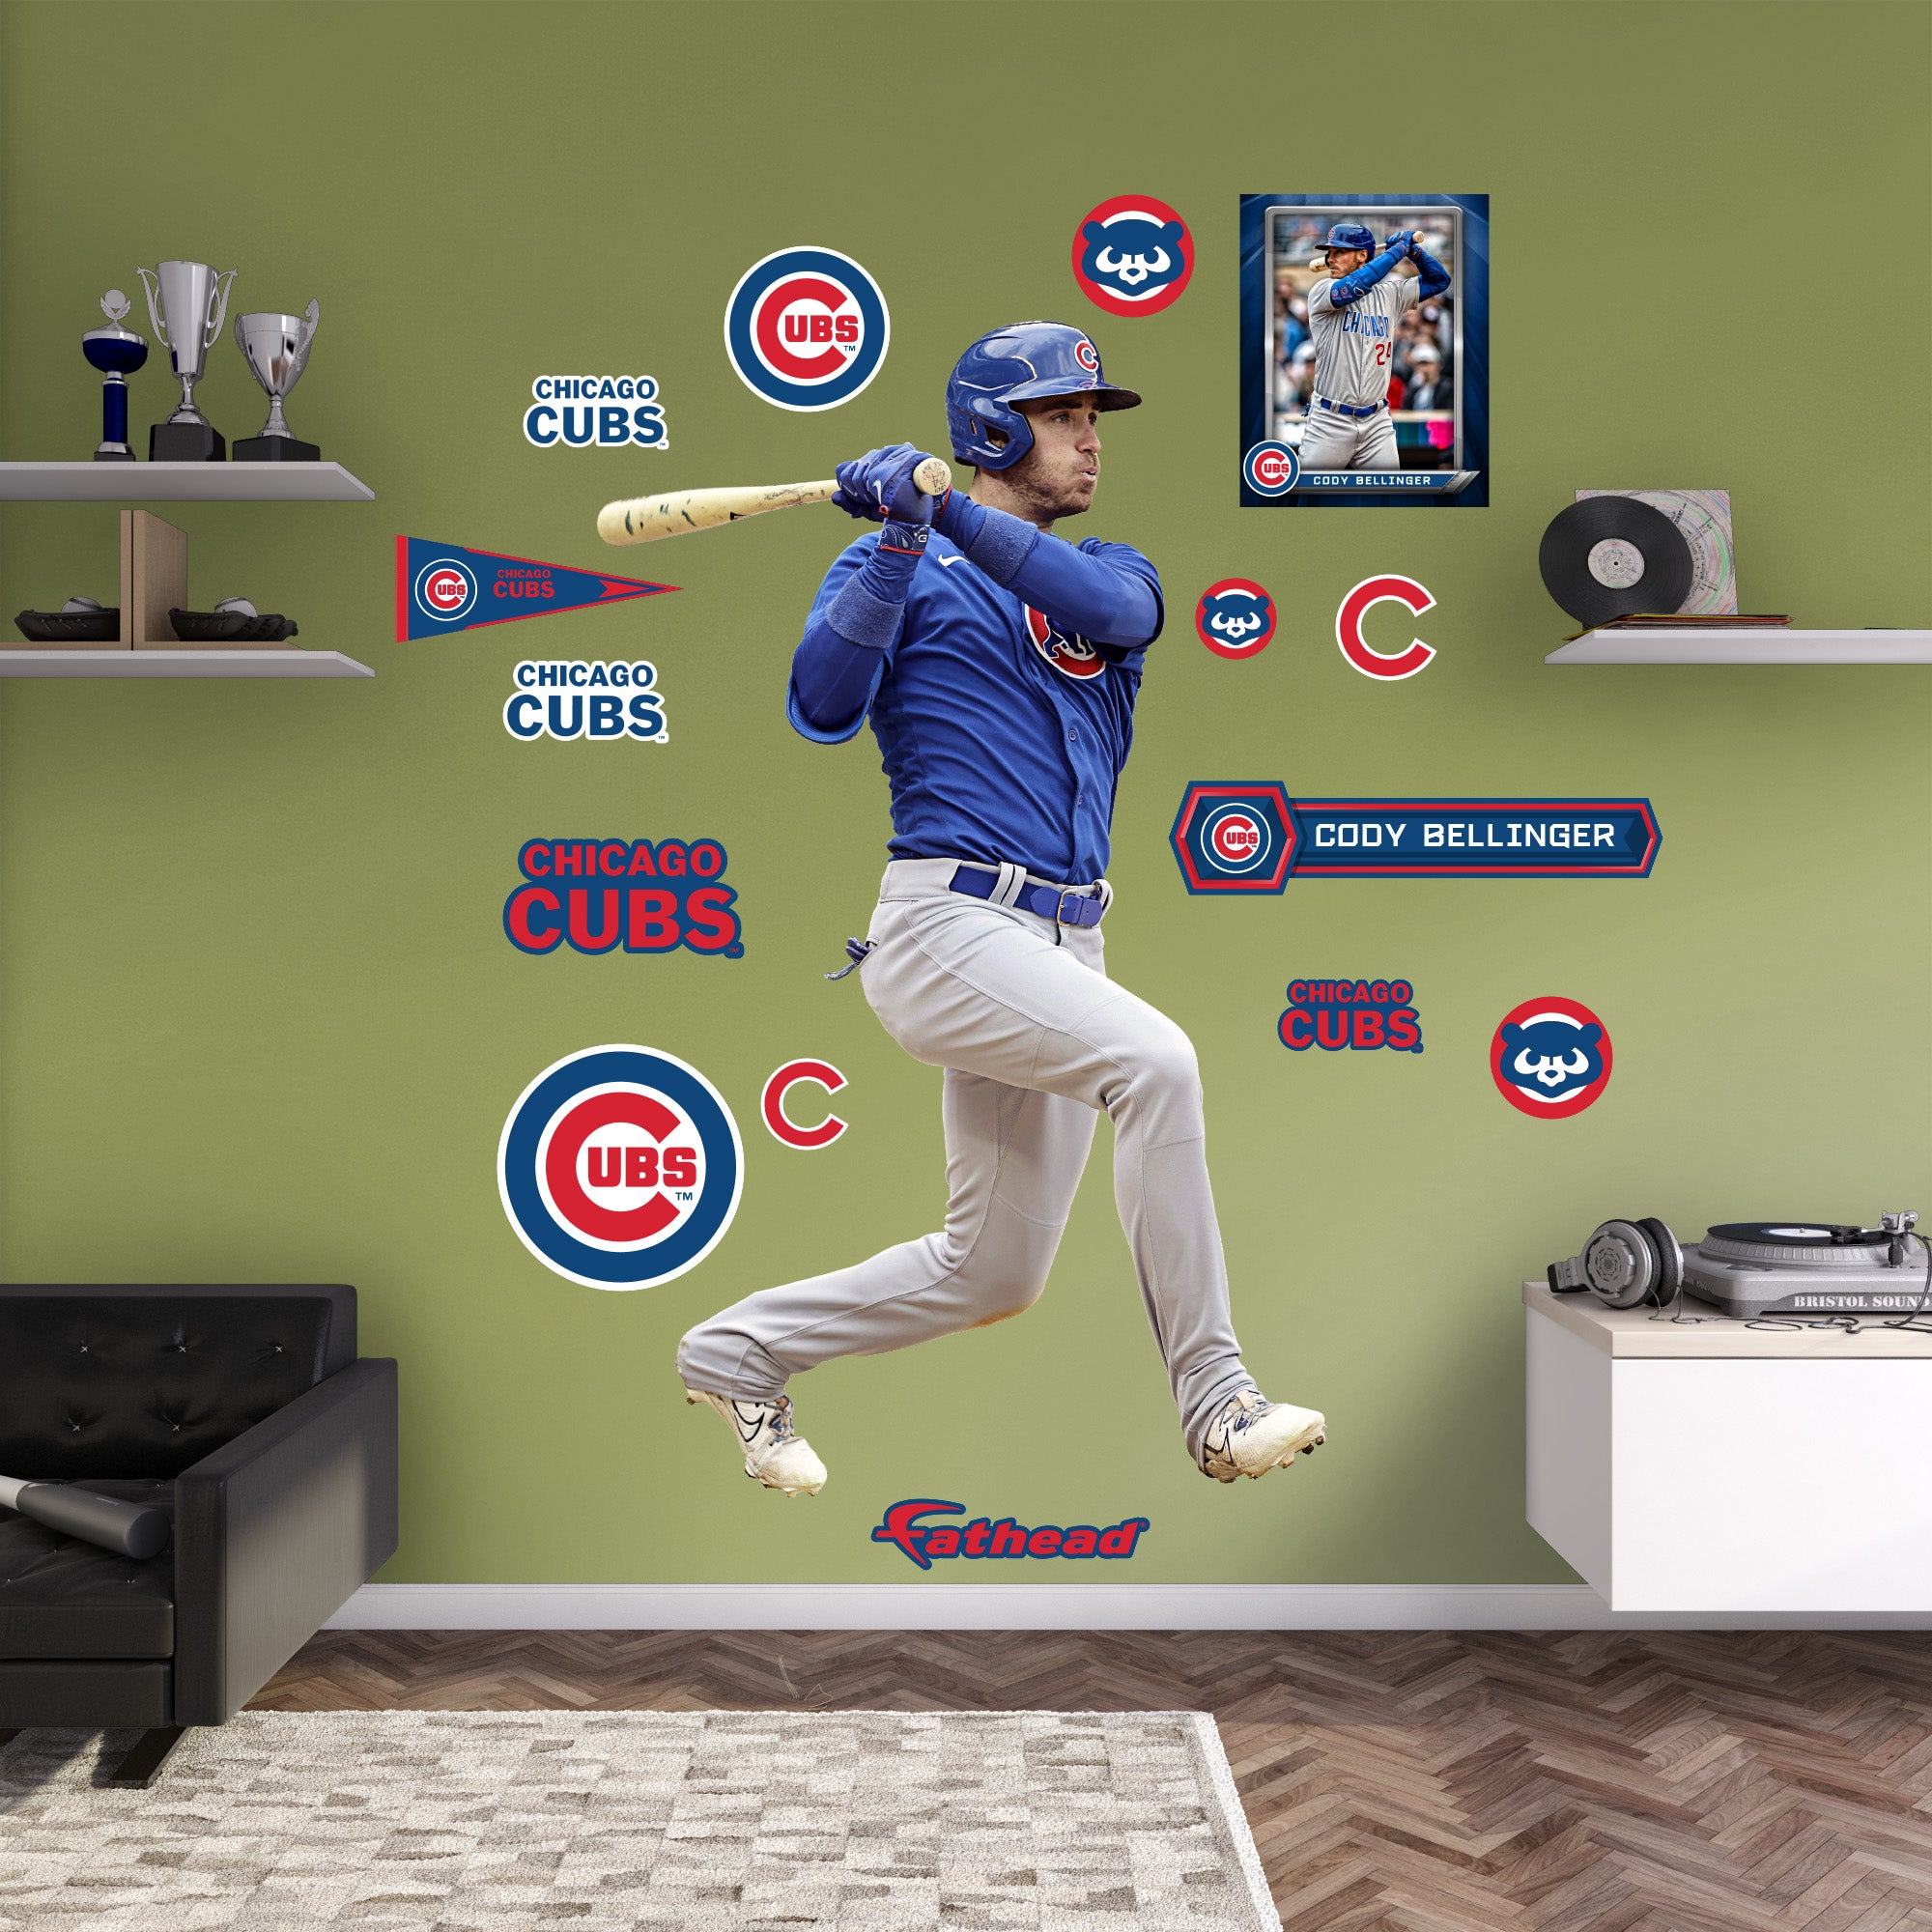 Fathead Chicago Cubs Giant Removable Wall Mural